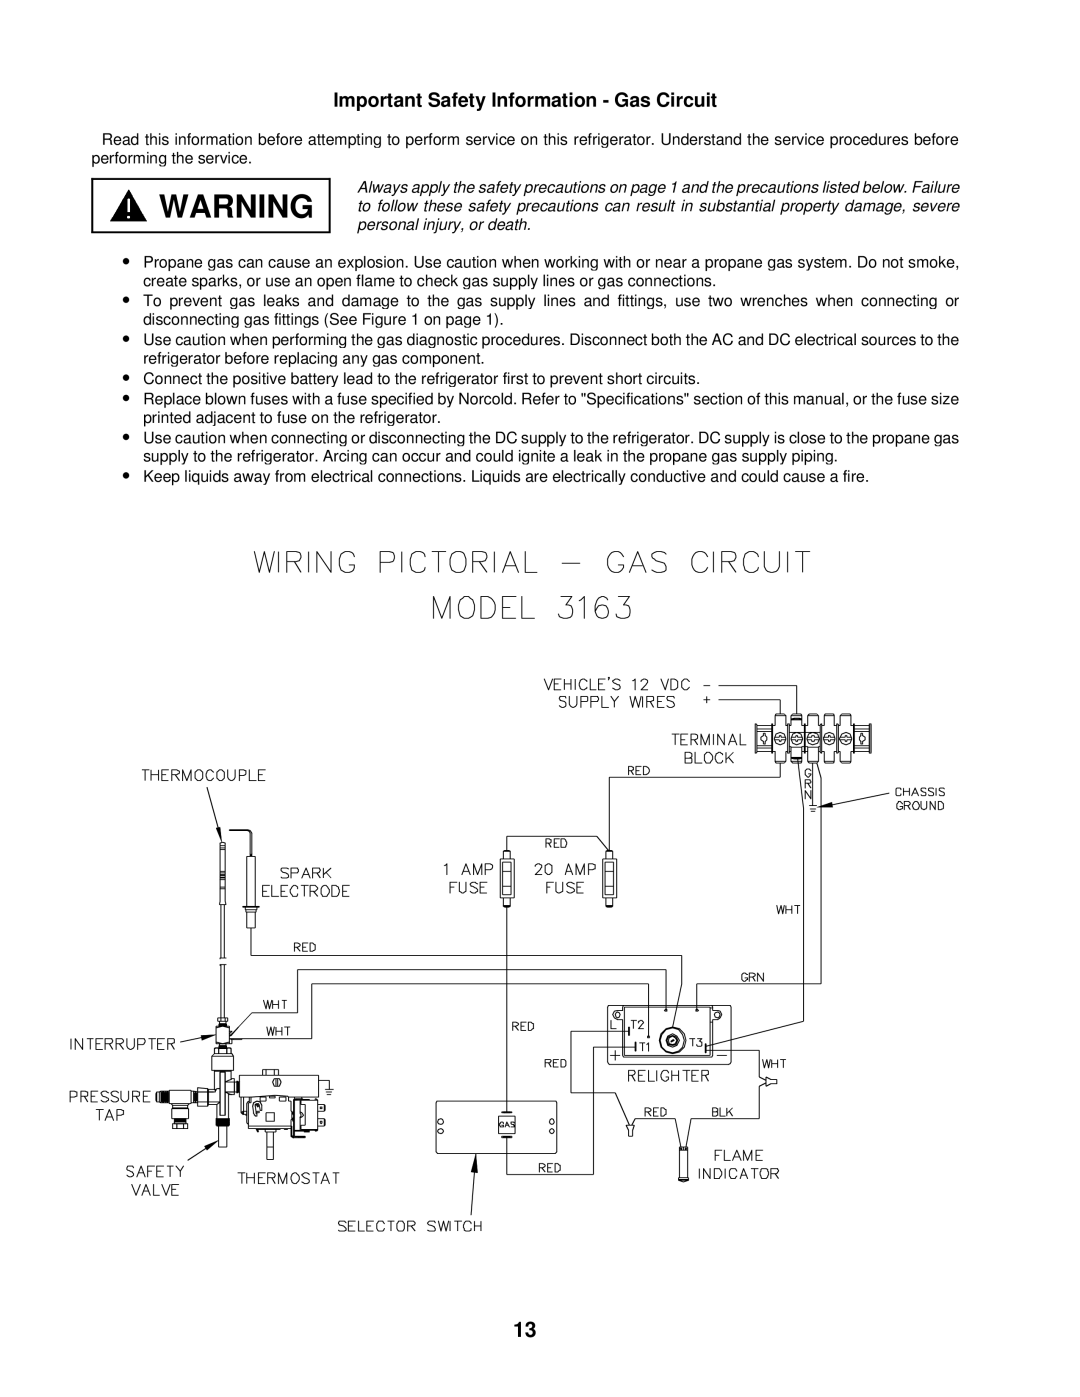 Bryant 3163 service manual Important Safety Information - Gas Circuit 